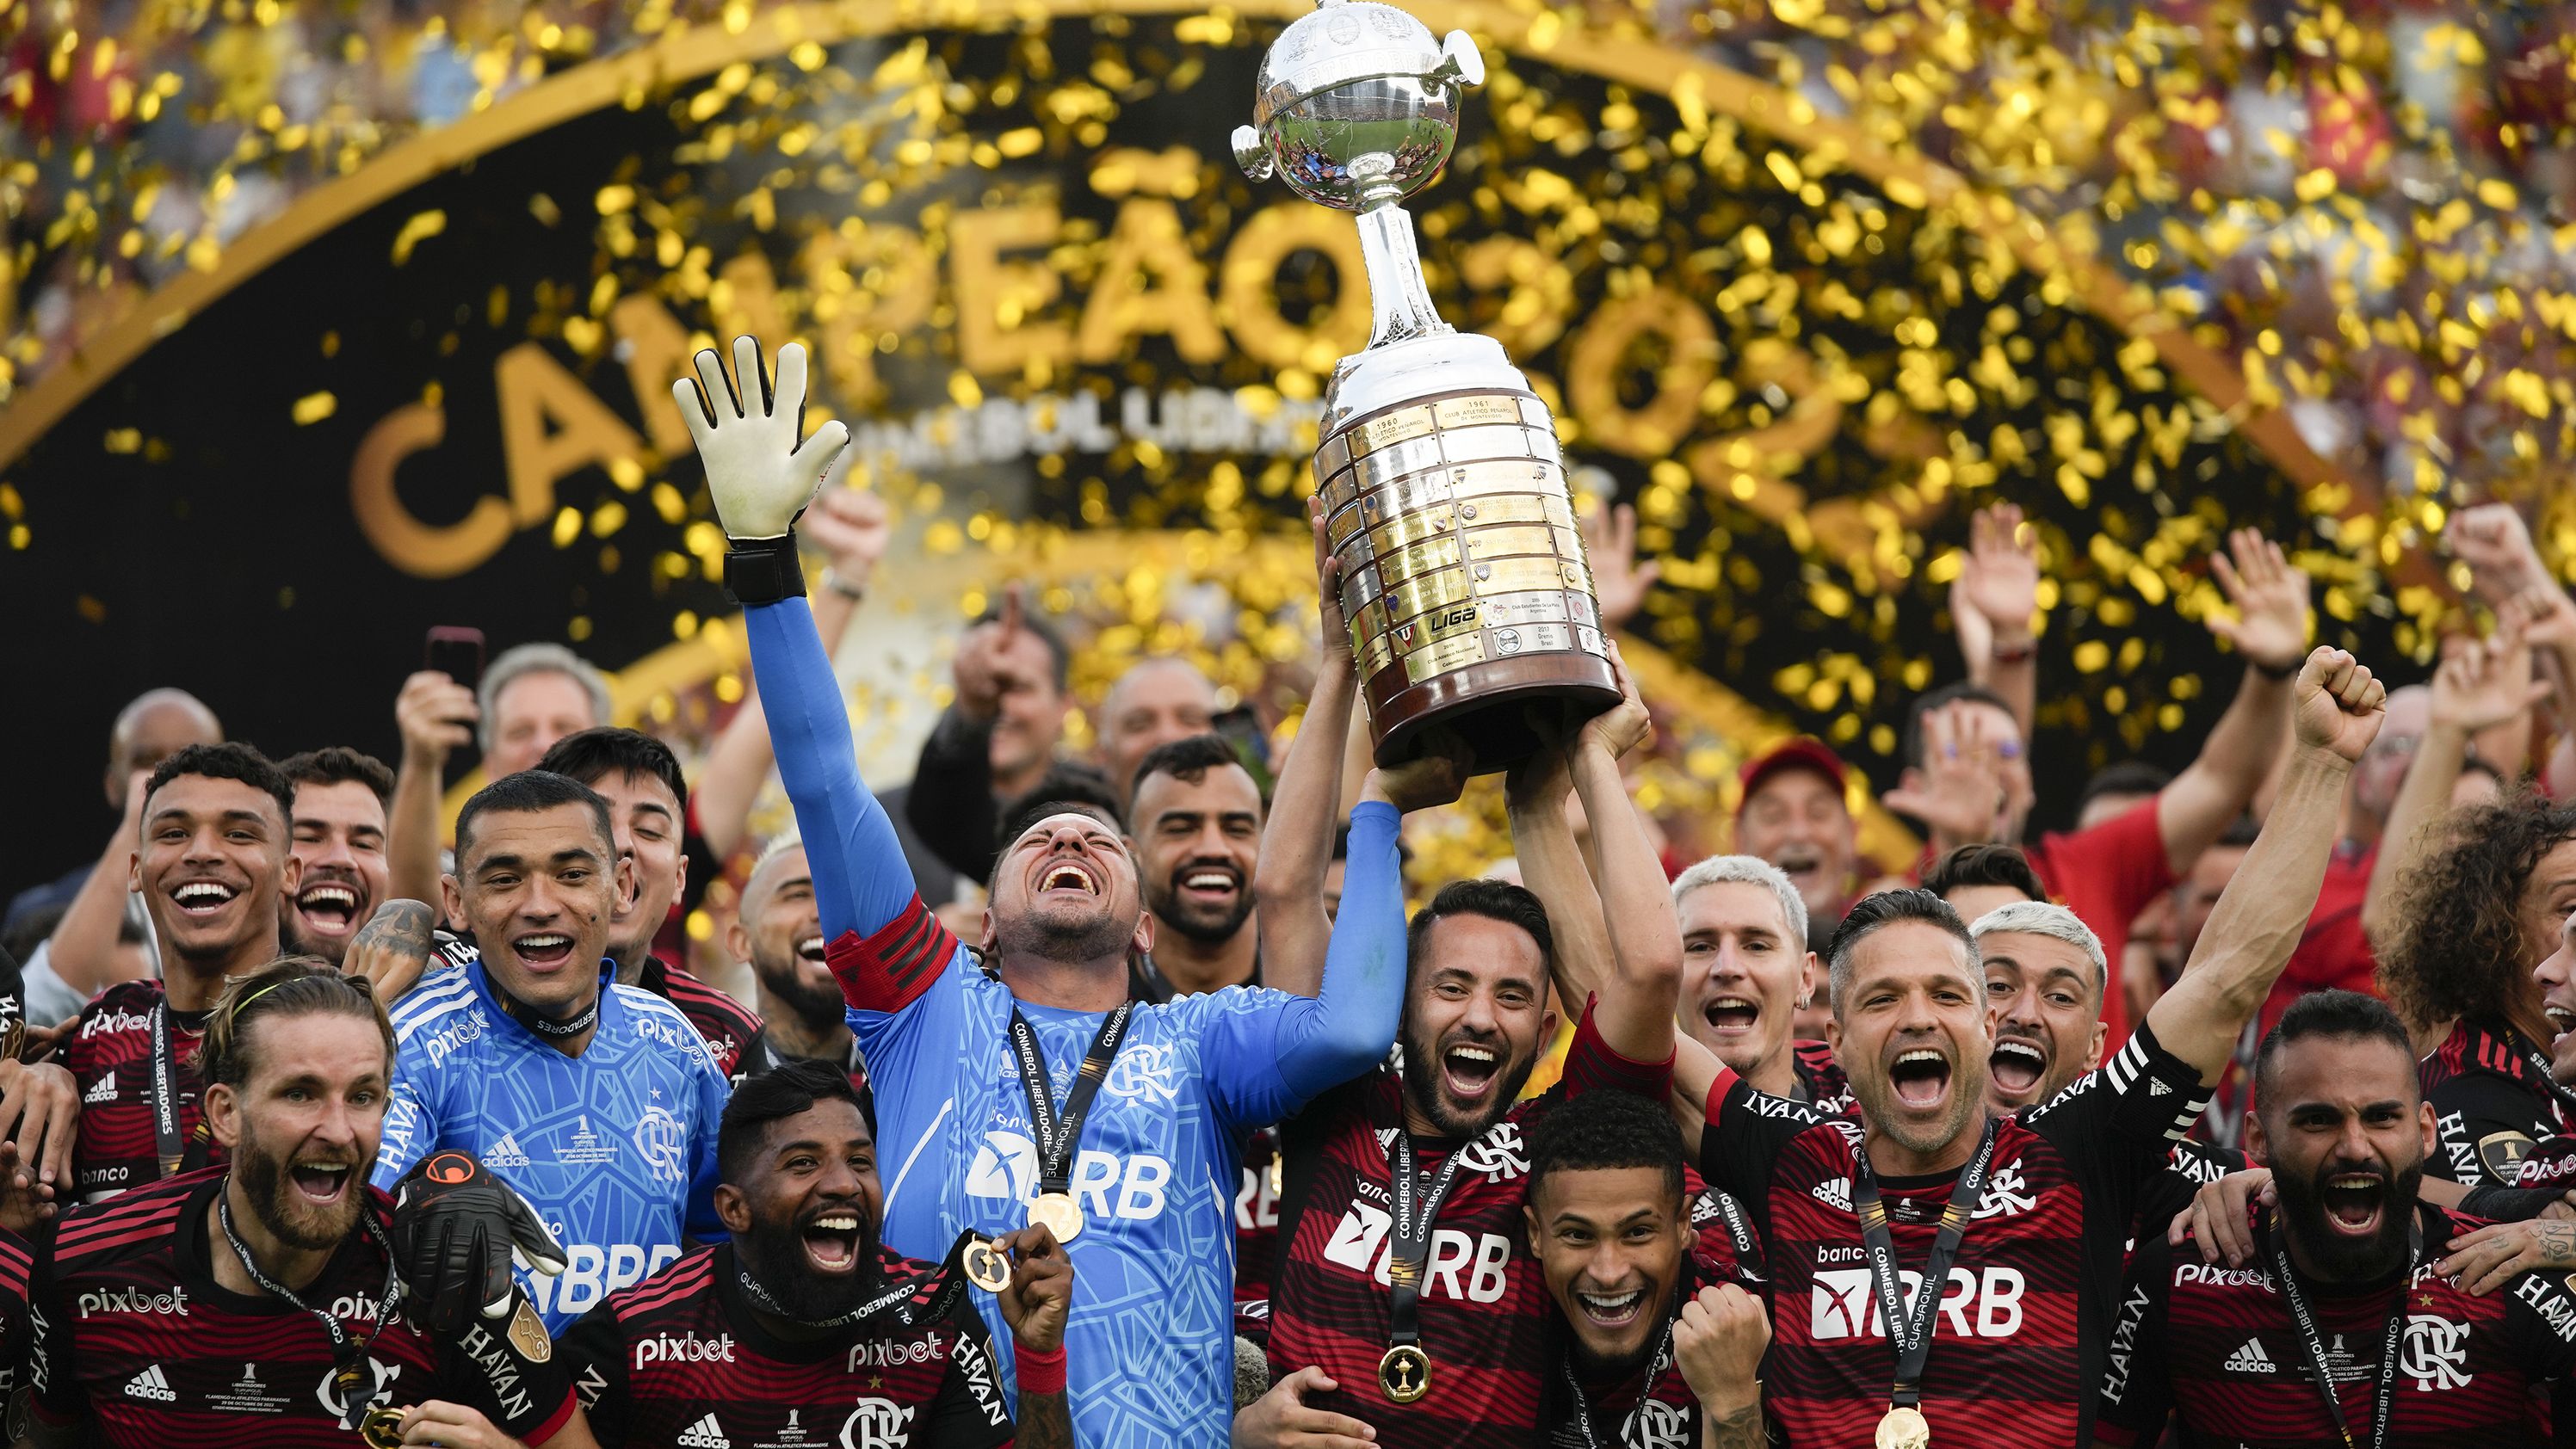 Brazil's Flamengo team celebrates with the trophy after winning the final Copa Libertadores soccer match against Brazil's Athletico Paranaense in Guayaquil, Ecuador, on Saturday, October 29.